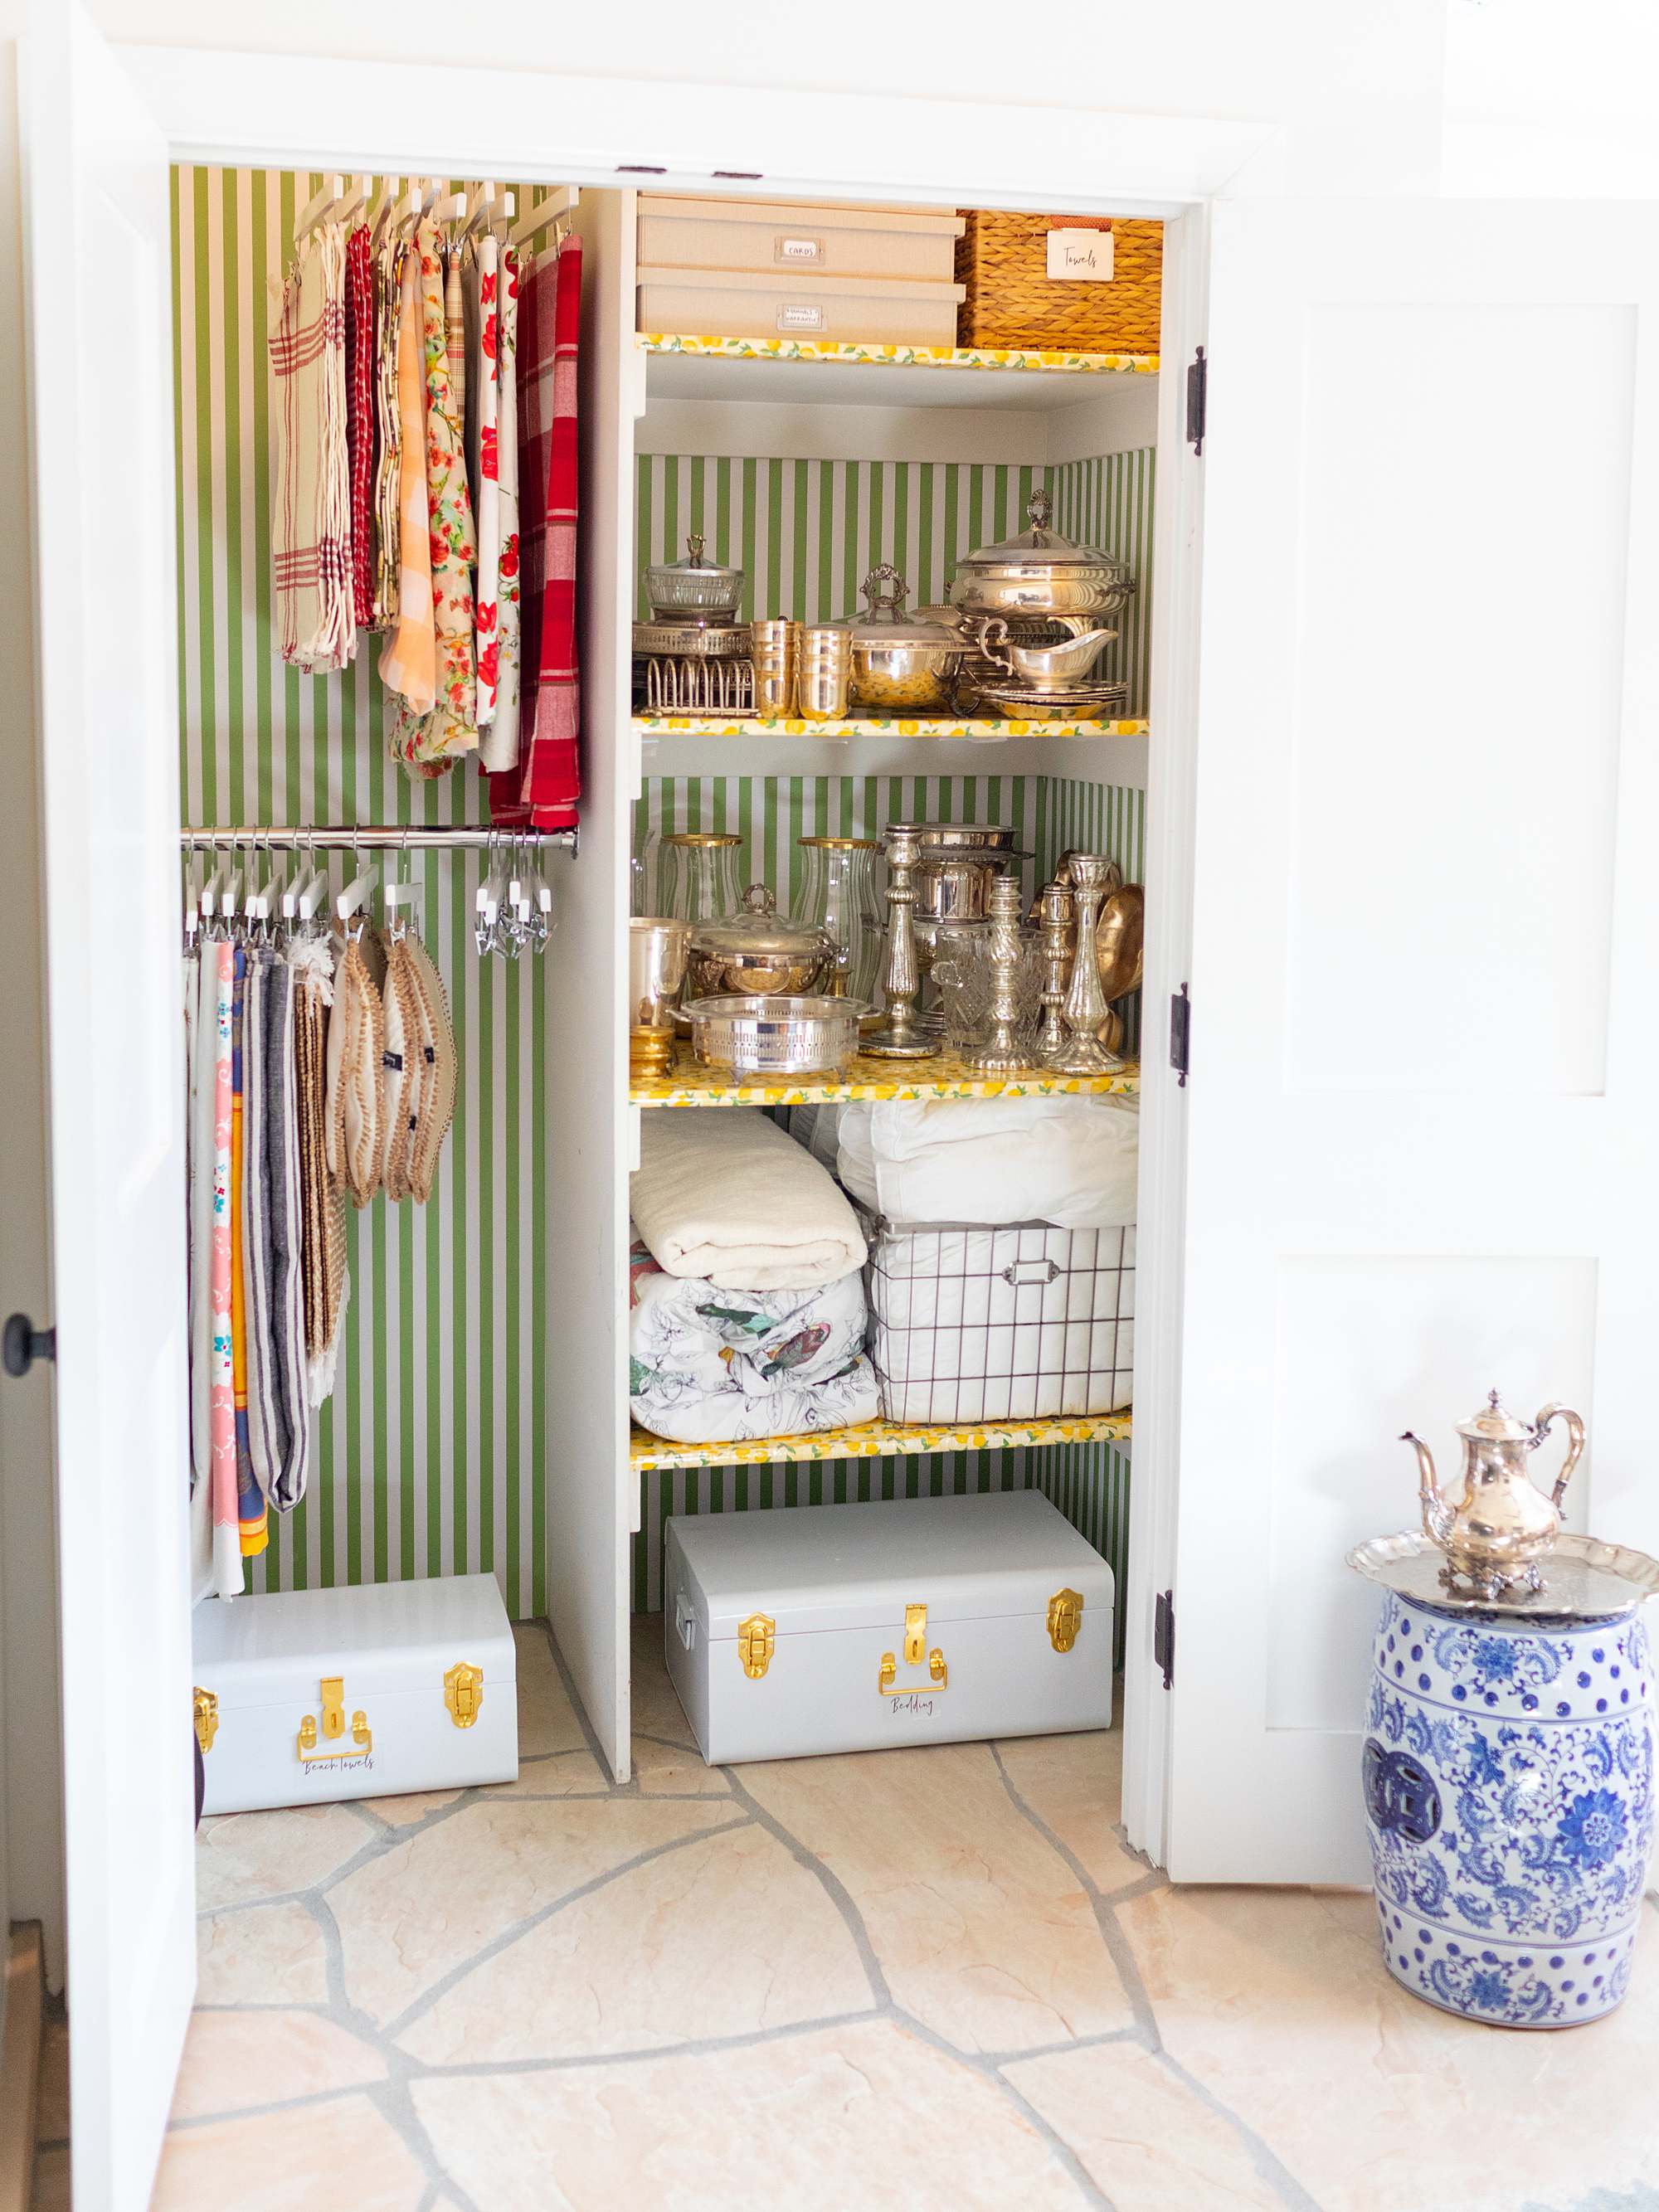 an entertaining closet for the hostess right off the dining room, organize linens and tablecloths and placements as well as serveware - it also serves as a guest closet. #organization Wallpaper closets #removablewallpaper